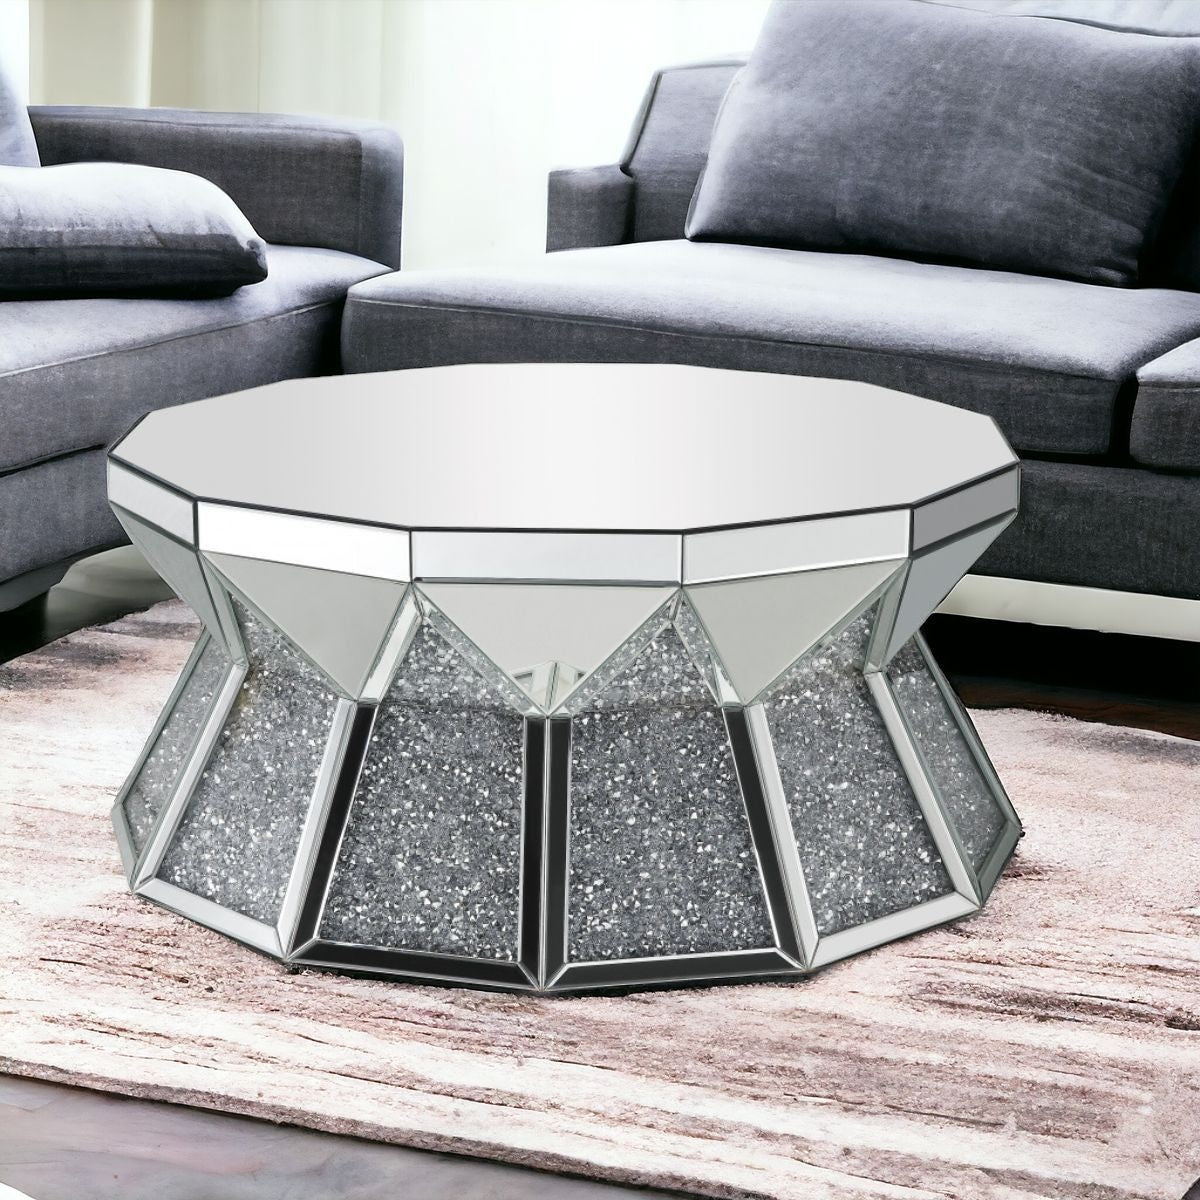 38" Silver Glass Octagon Mirrored Coffee Table